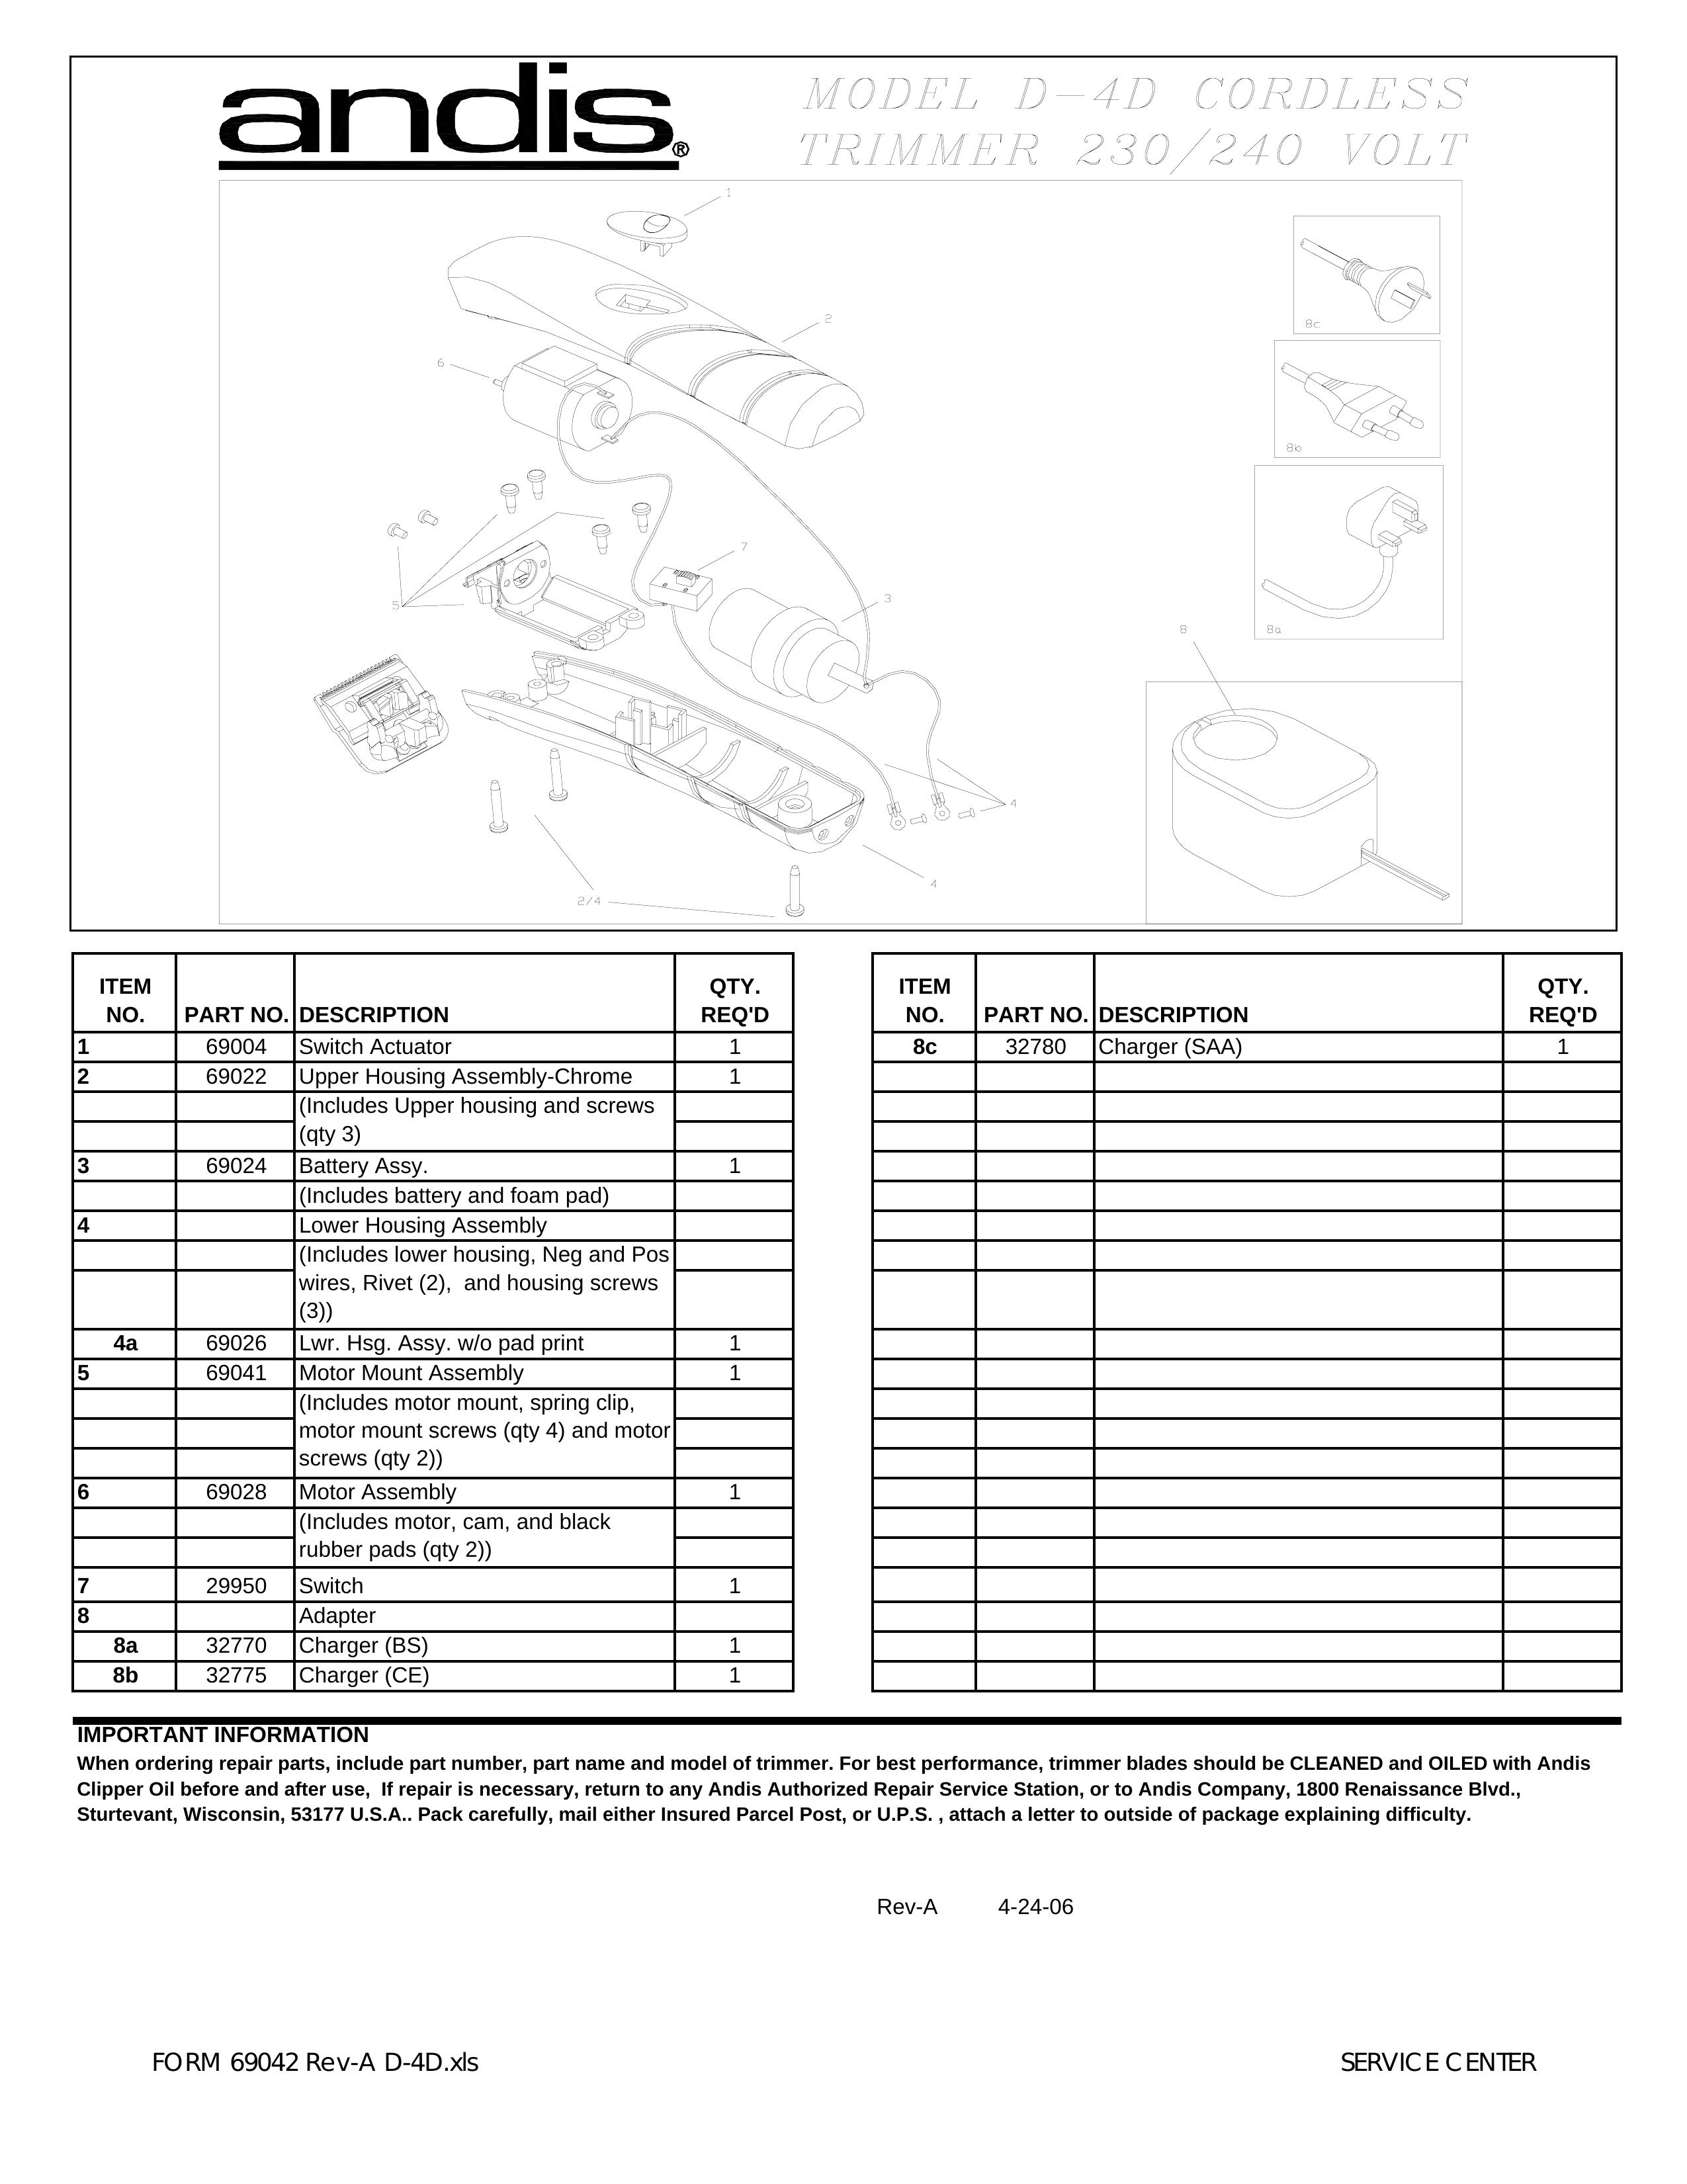 Andis Company D-4D Trimmer User Manual